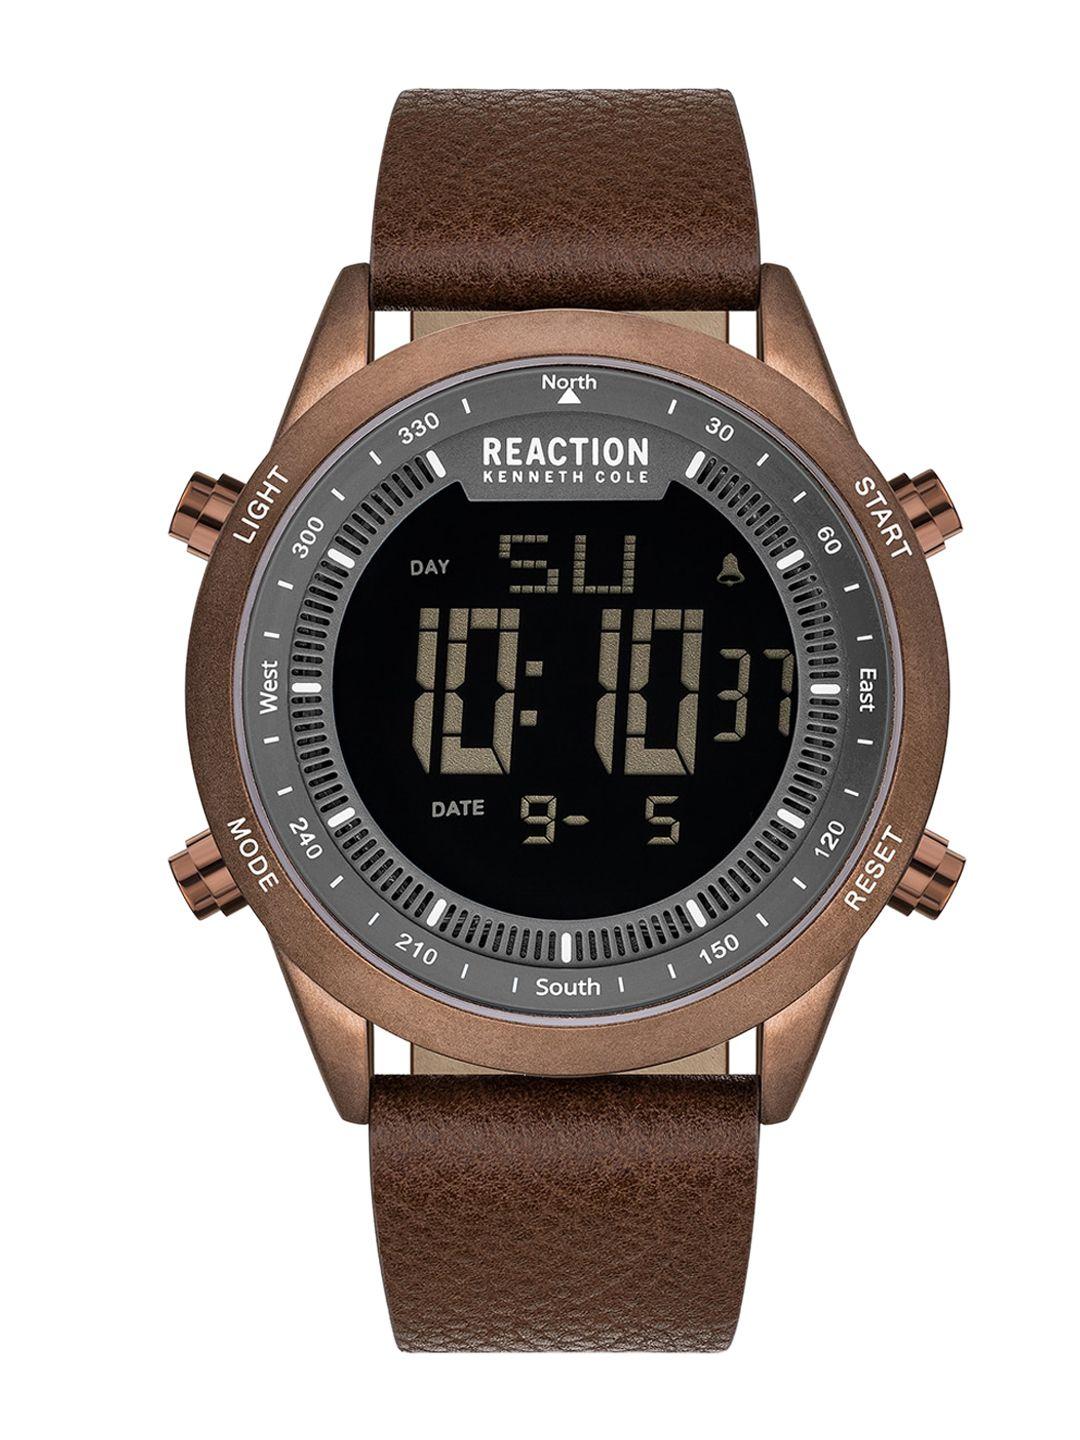 REACTION KENNETH COLE Men Brown Dial & Brown Leather Straps Digital Watch KRWGD2191202